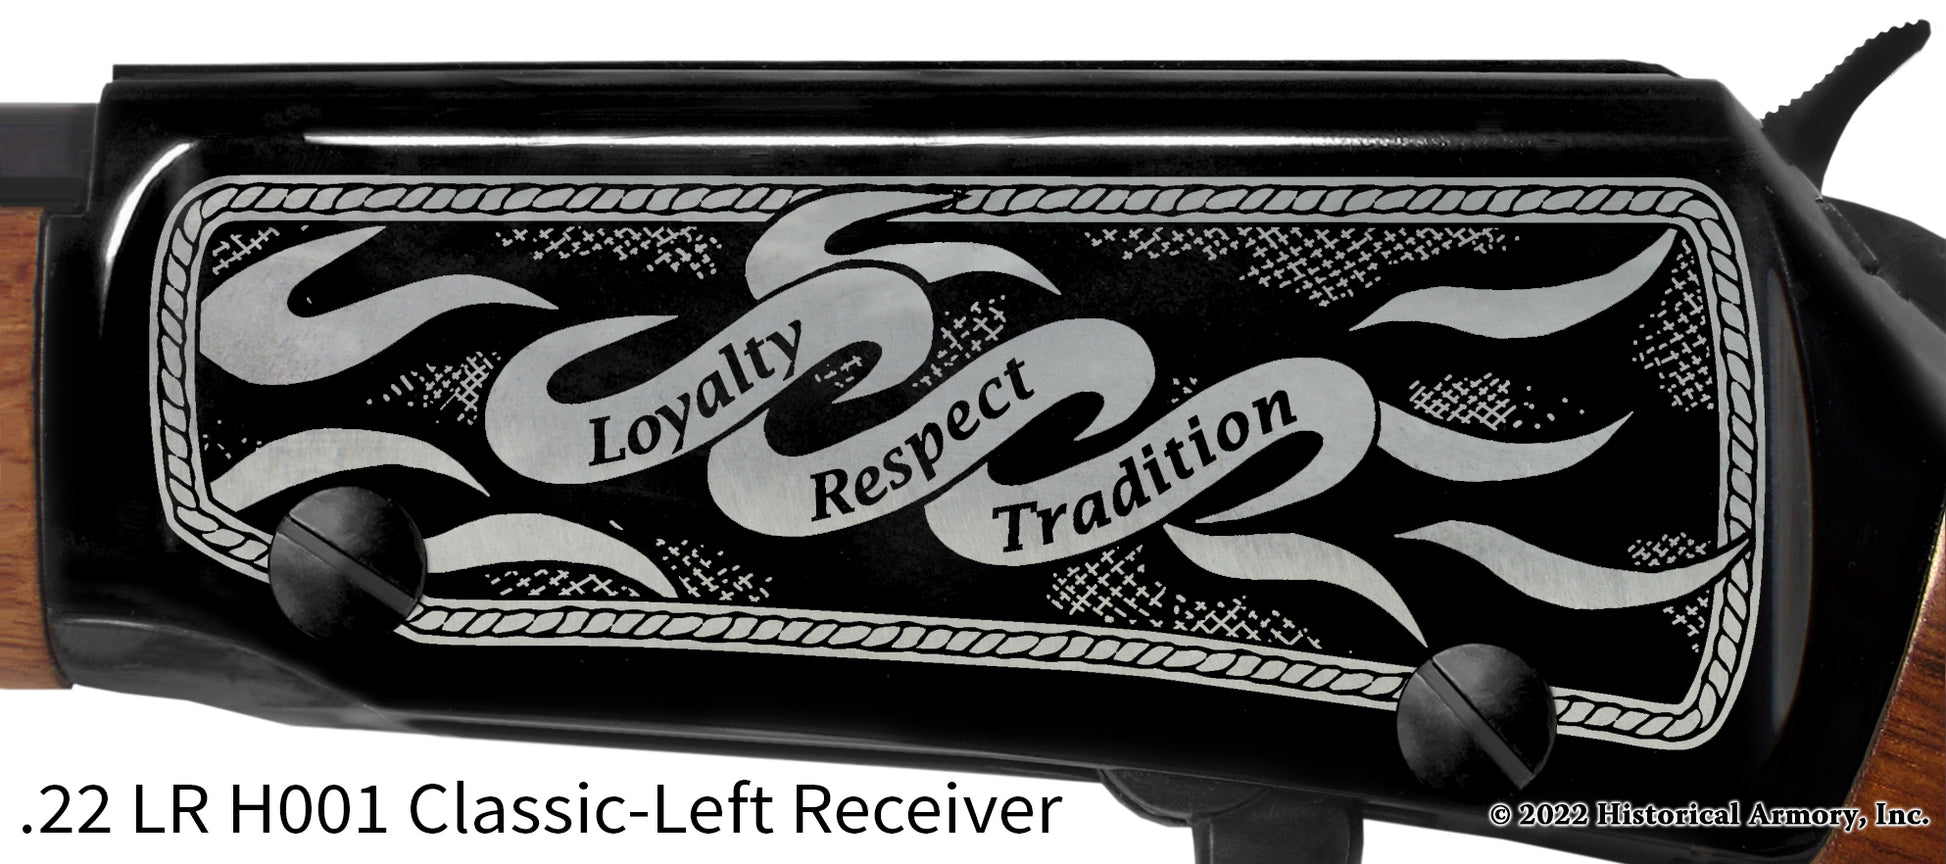 Firefighter Tradition of Loyalty, Respect, and Tradition Engraved Rifle Limited Edition